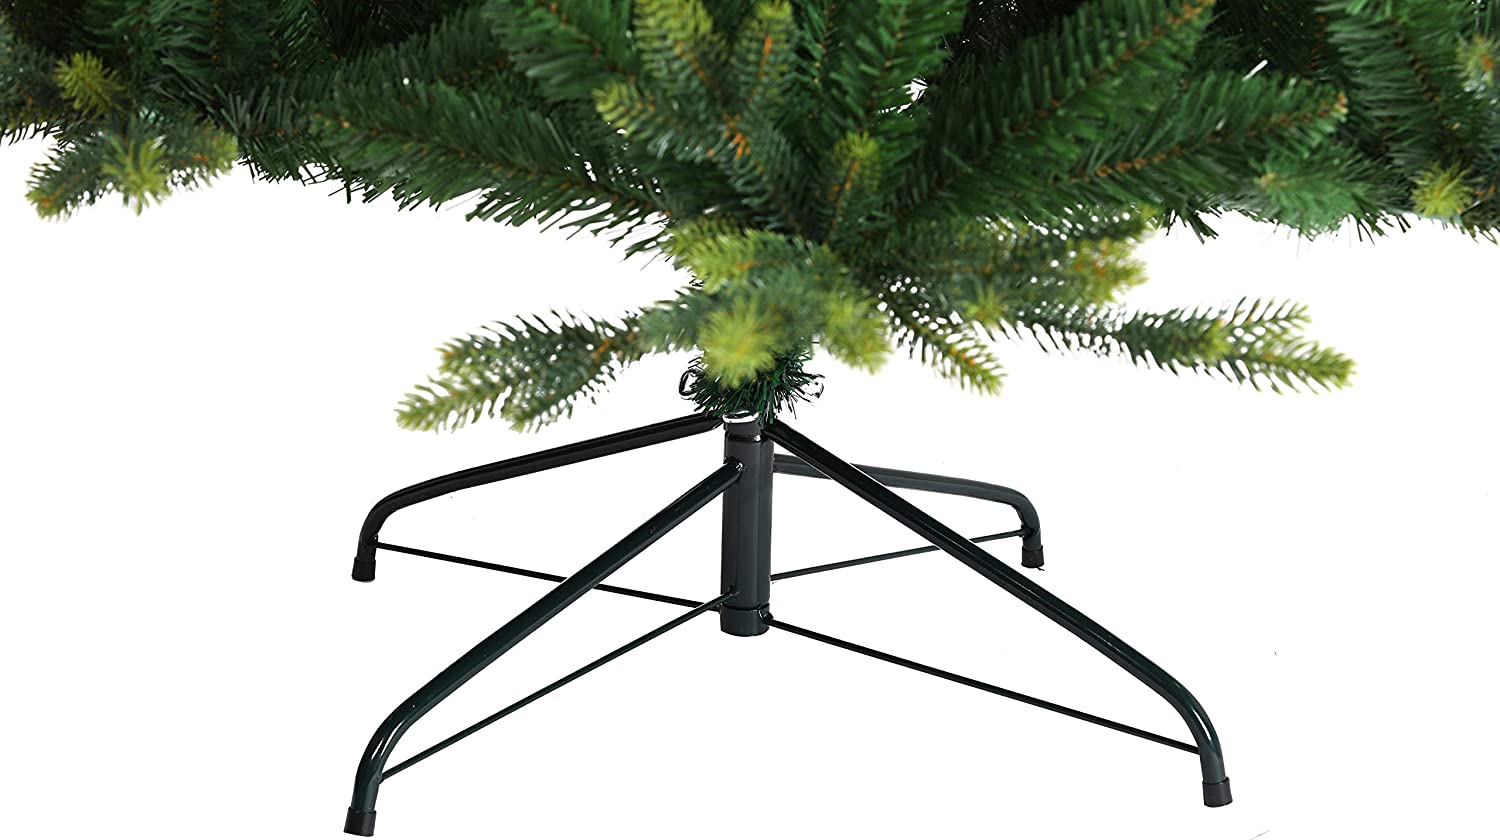 Evre Spruce 7Ft Christmas Tree close up of metal stand